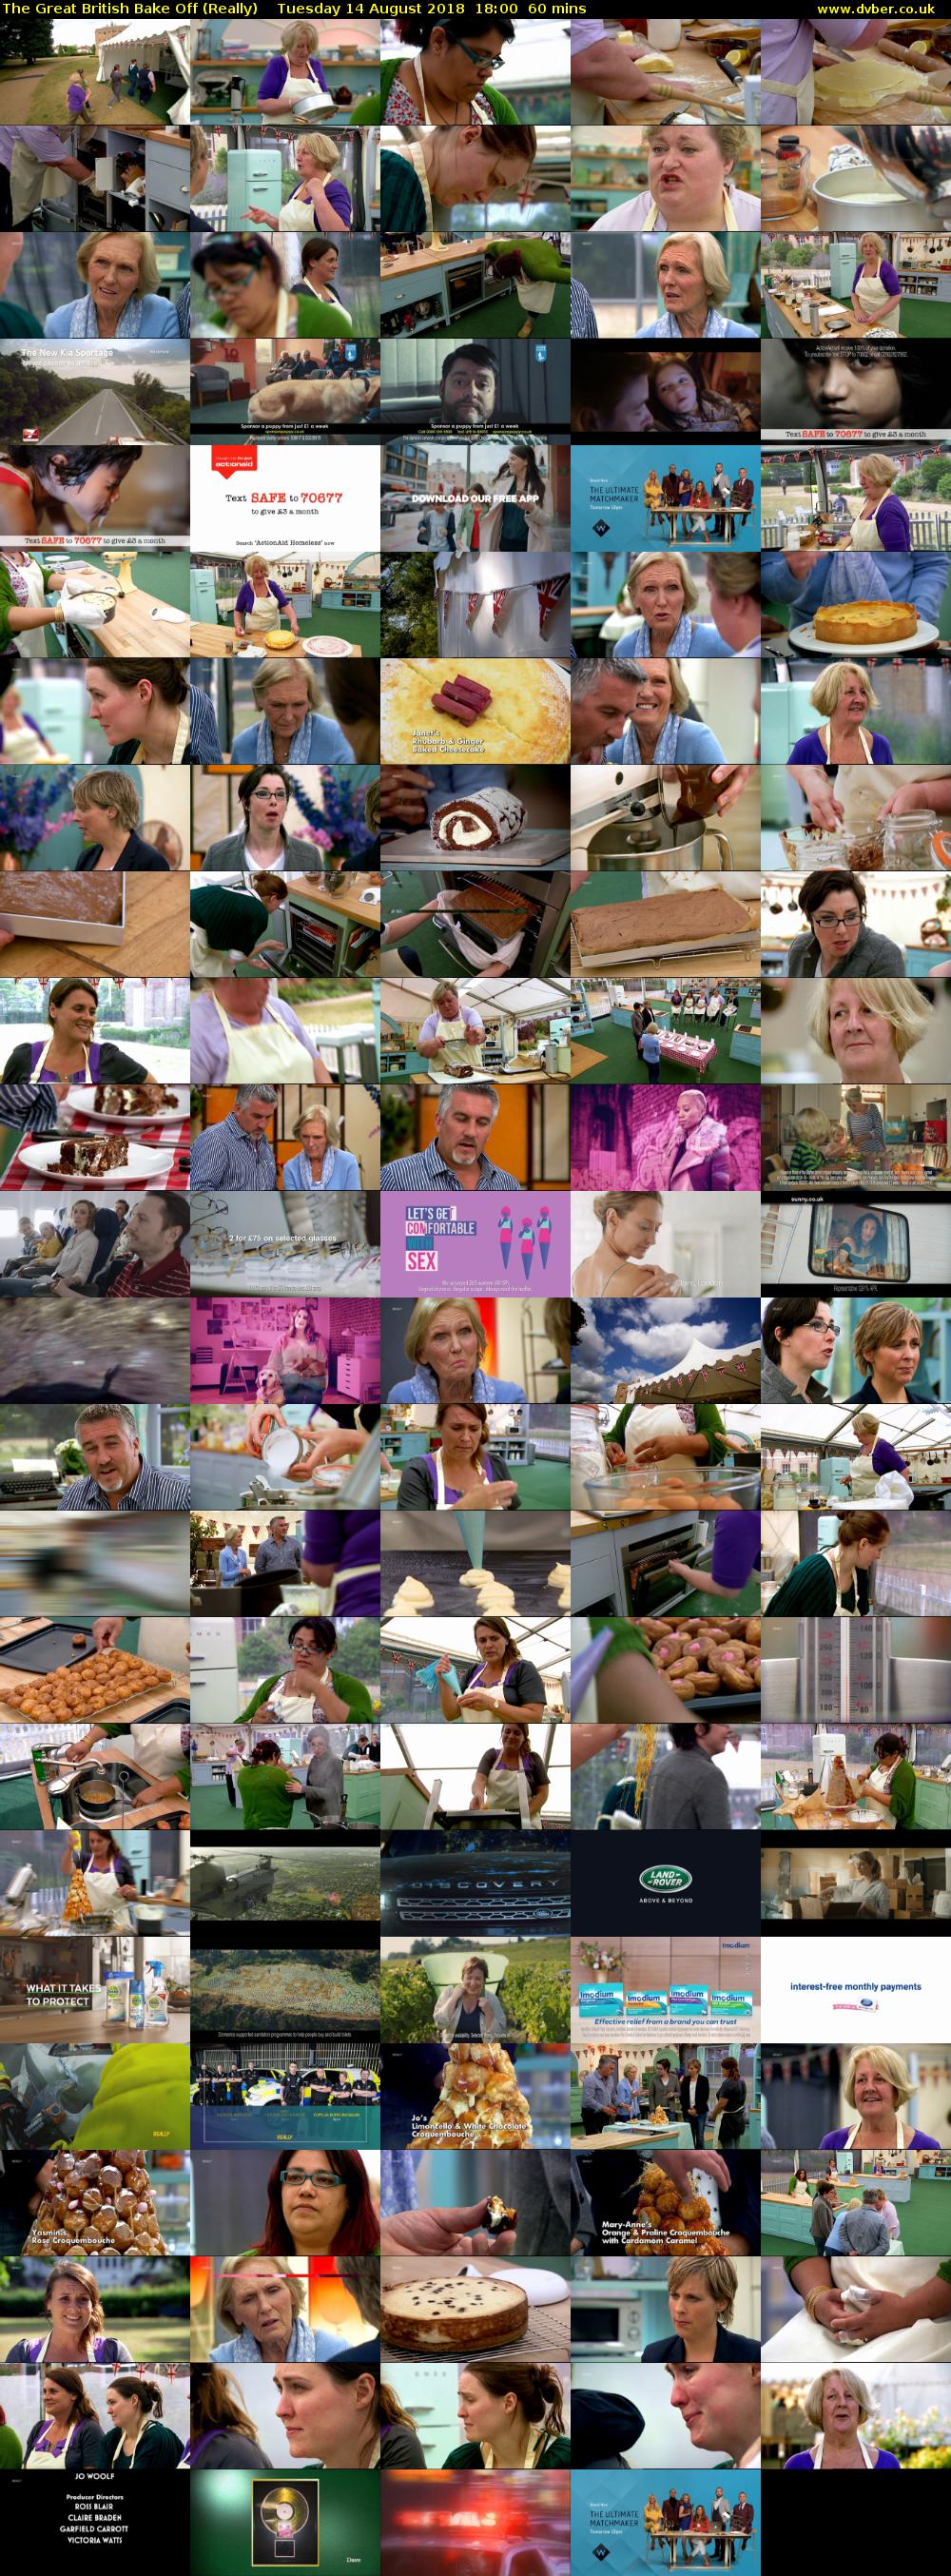 The Great British Bake Off (Really) Tuesday 14 August 2018 18:00 - 19:00